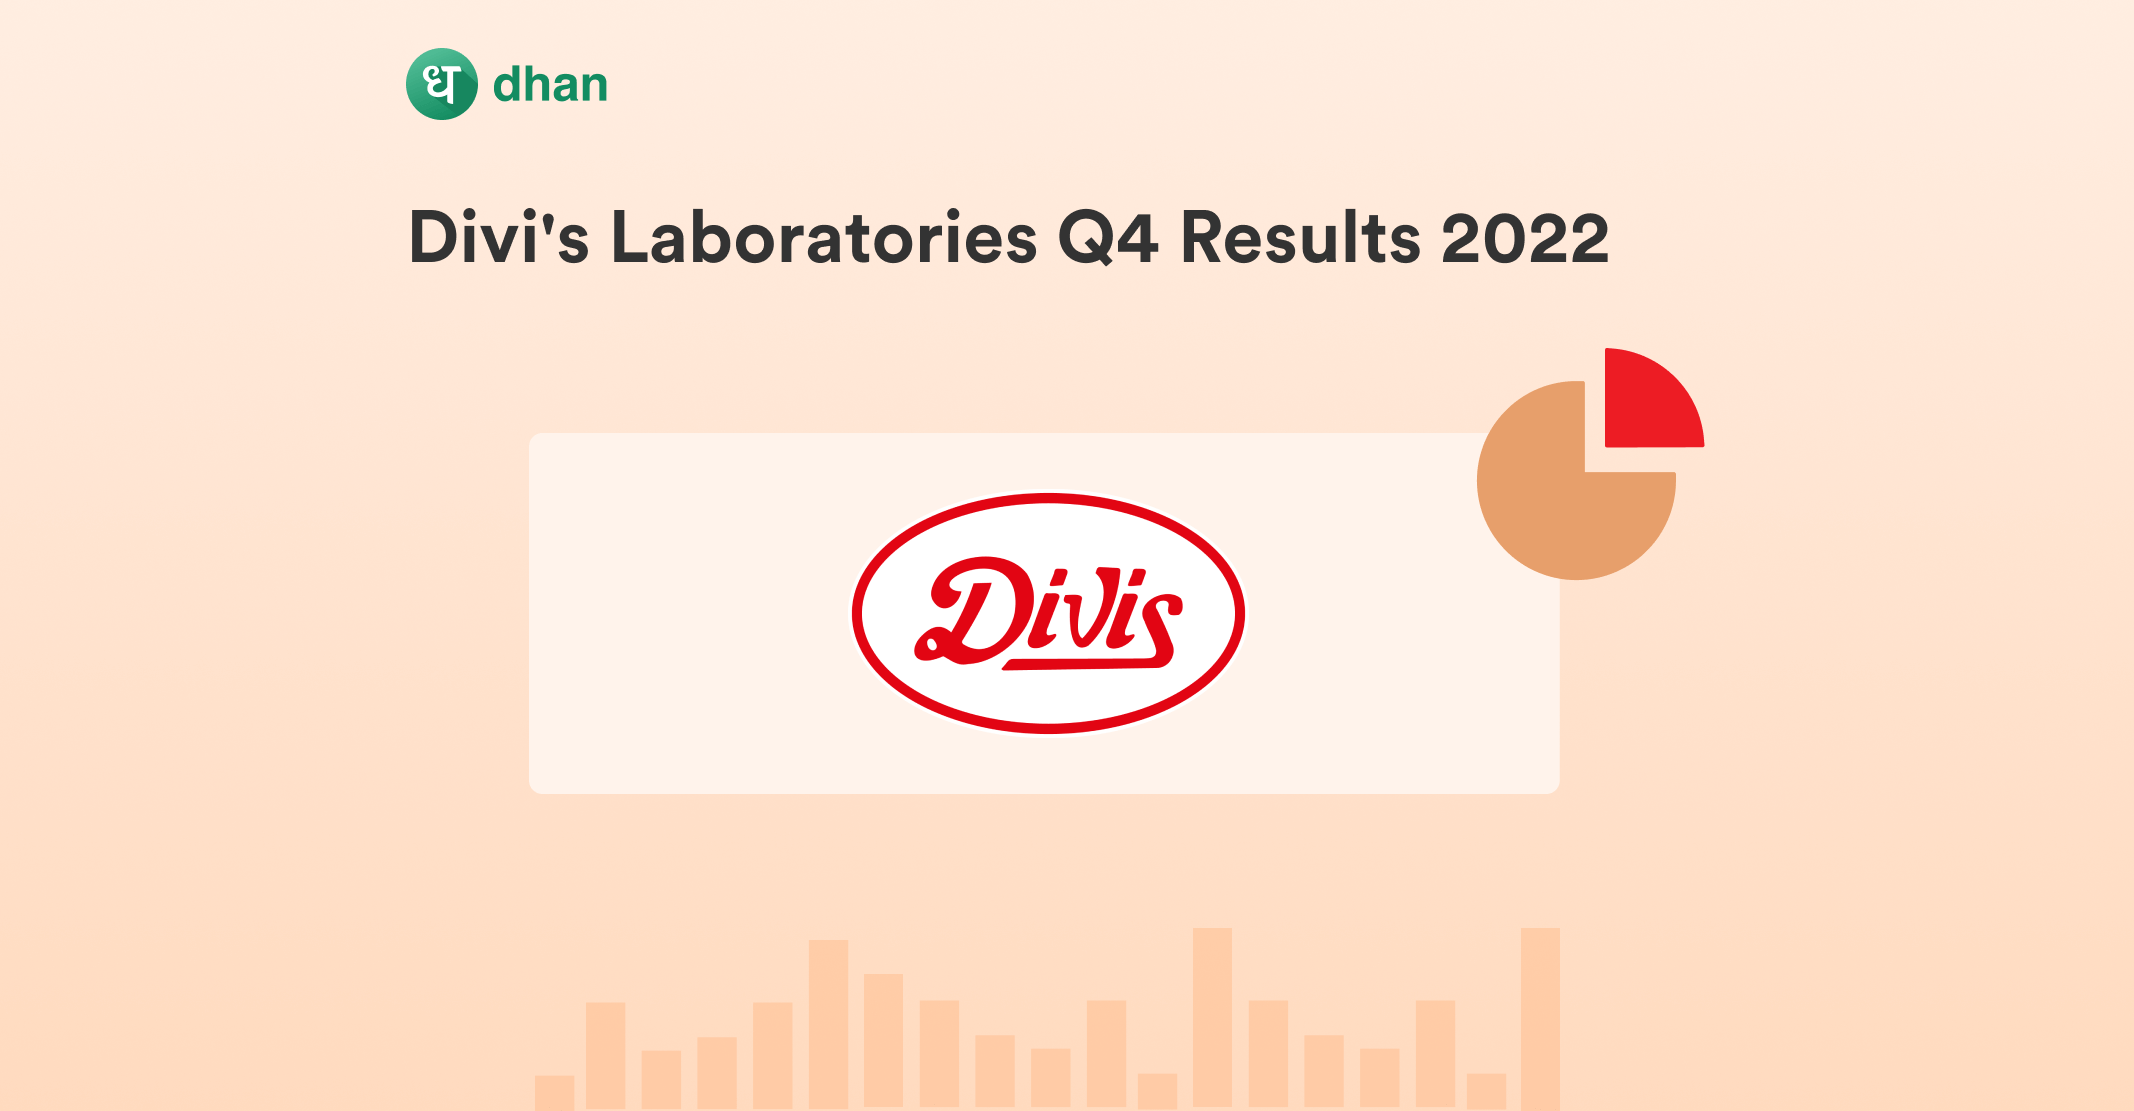 Divi’s Labs Q4 Results 2022 - Revenue Up by 40.8% YoY